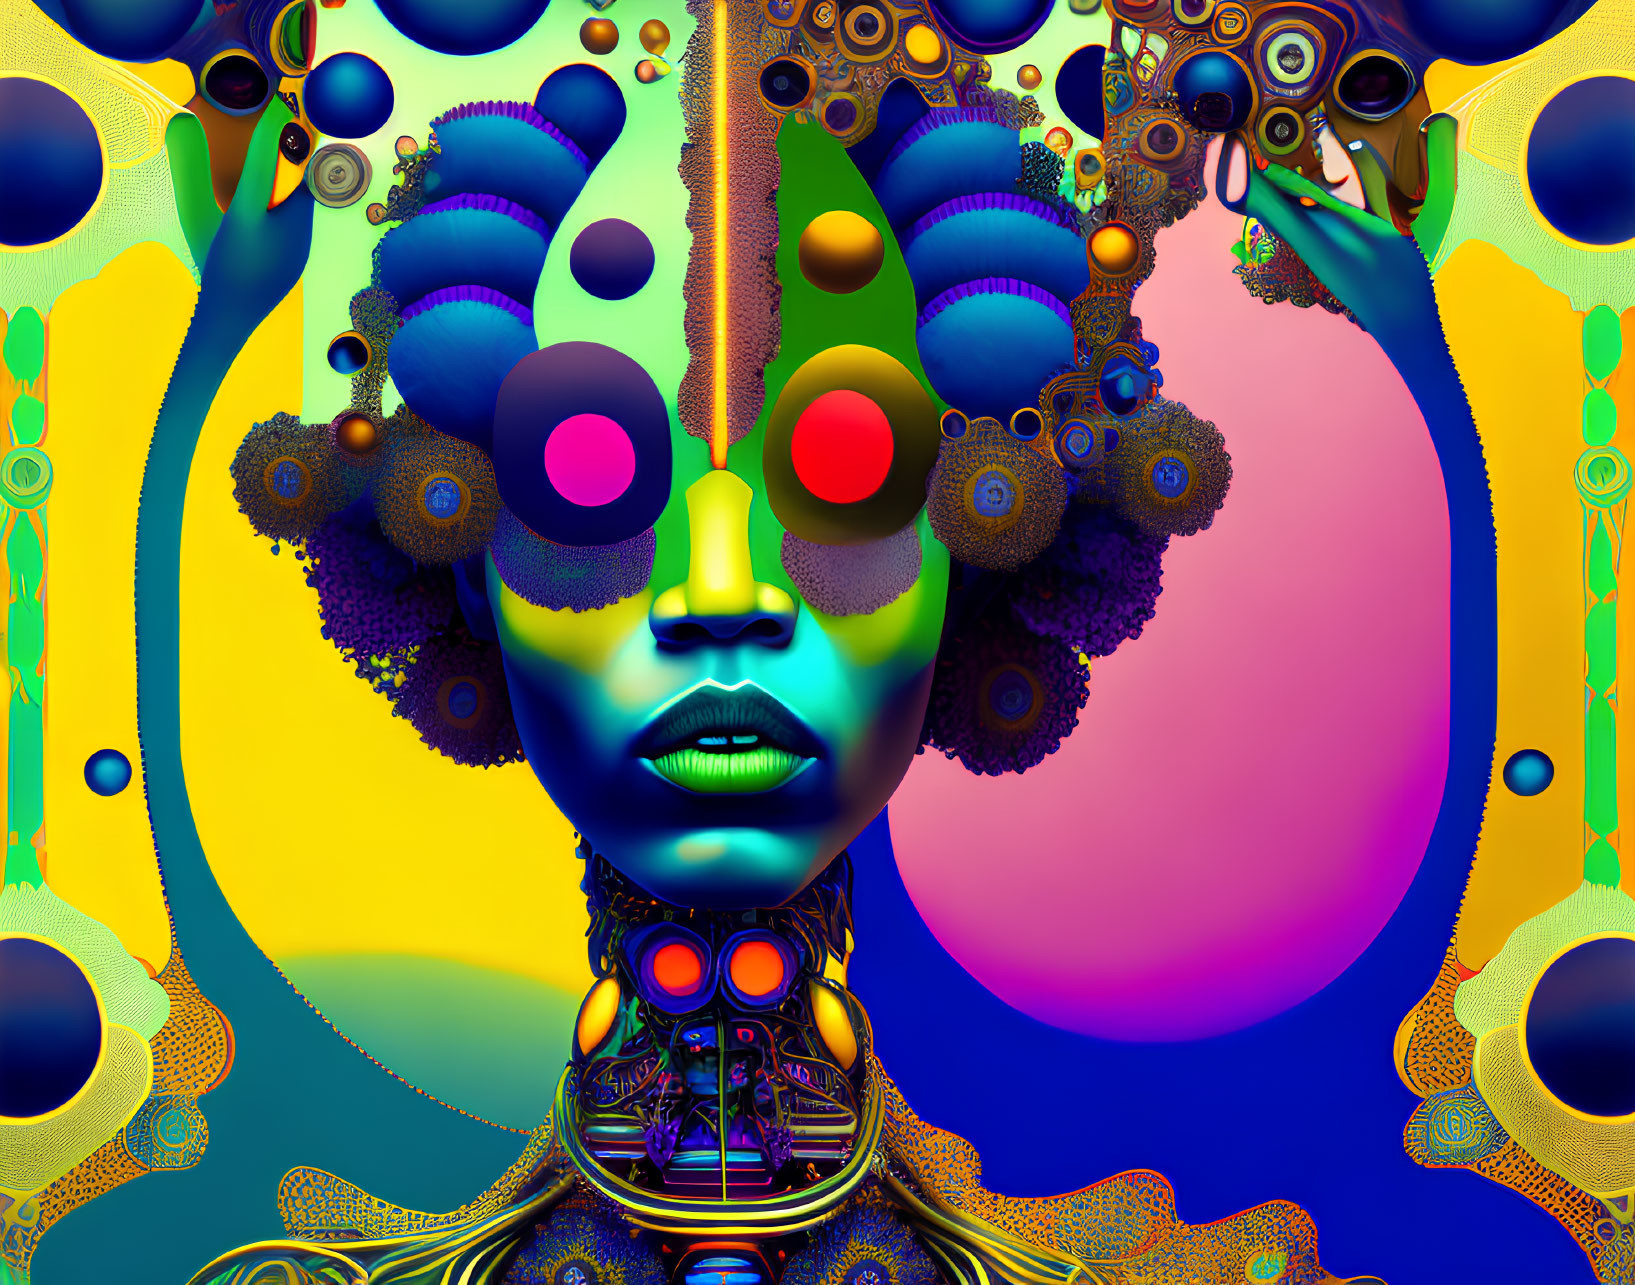 Symmetrical Psychedelic Artwork with Central Humanoid Figure